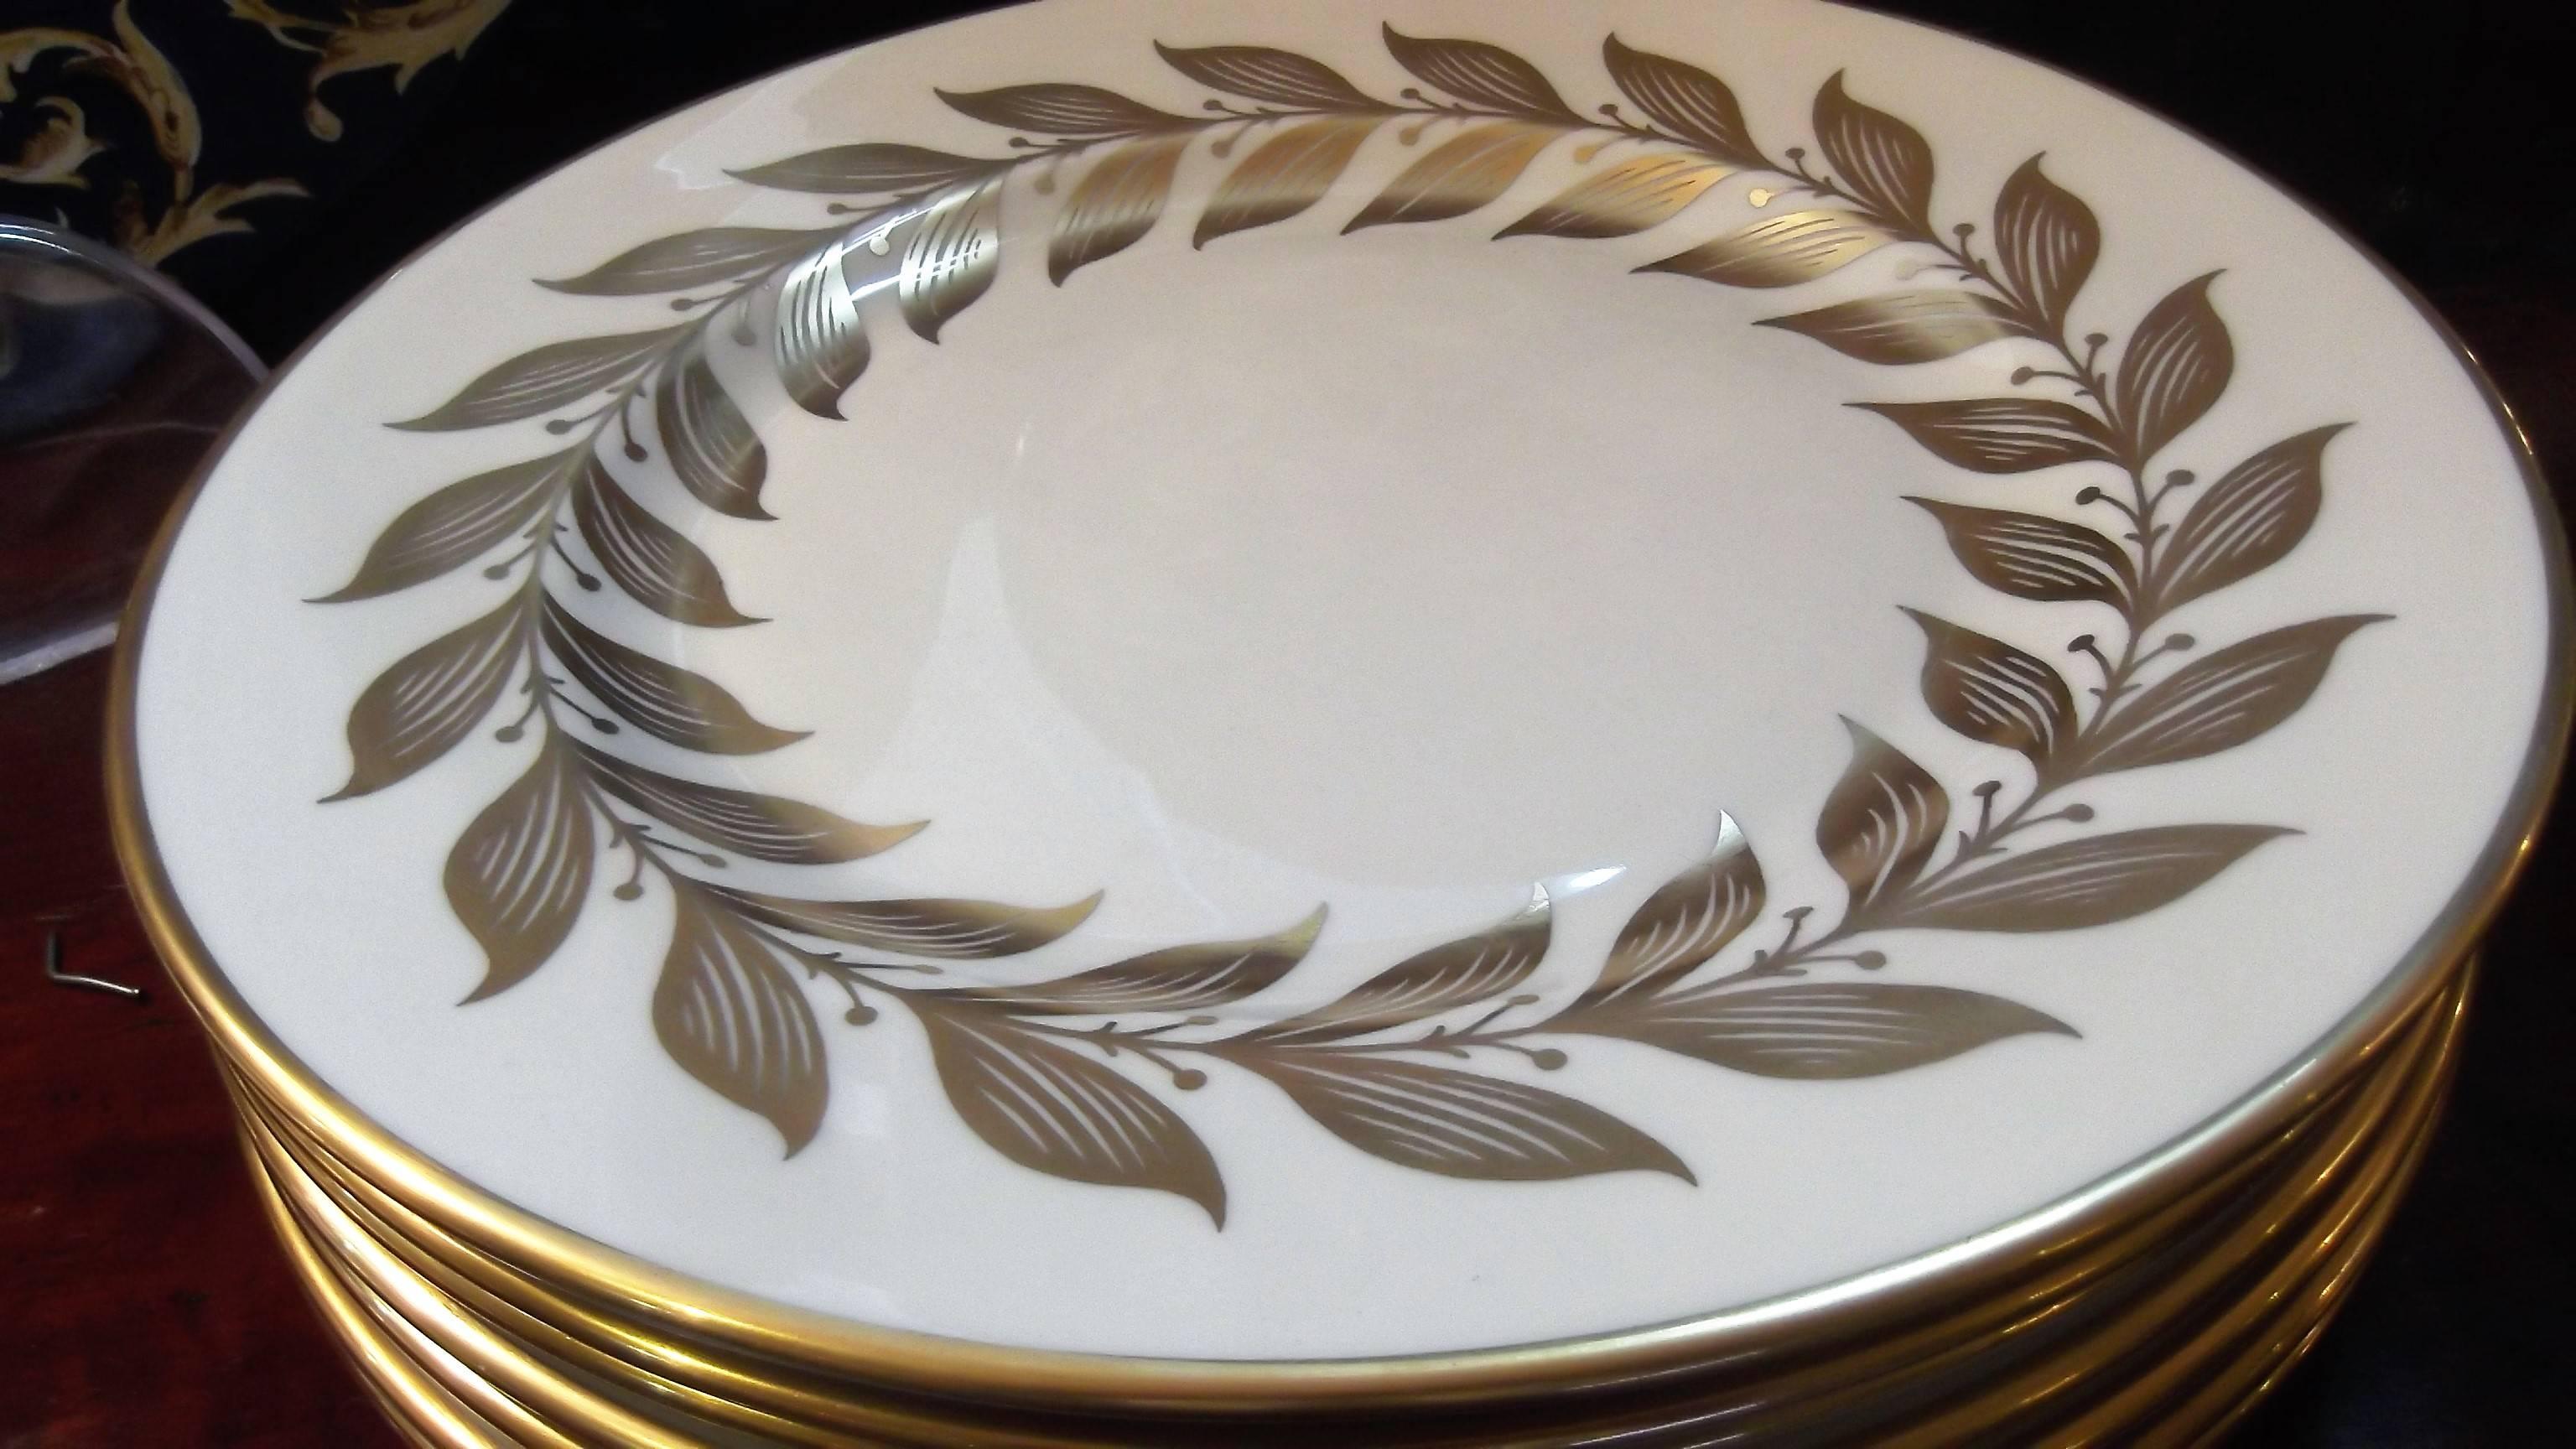 Elegant set of eight service plates made in Meridian Connecticut, marked with a blue SC mark. Ivory background with gold wreath border and gold edge, circa 1950. Measures: 10.5